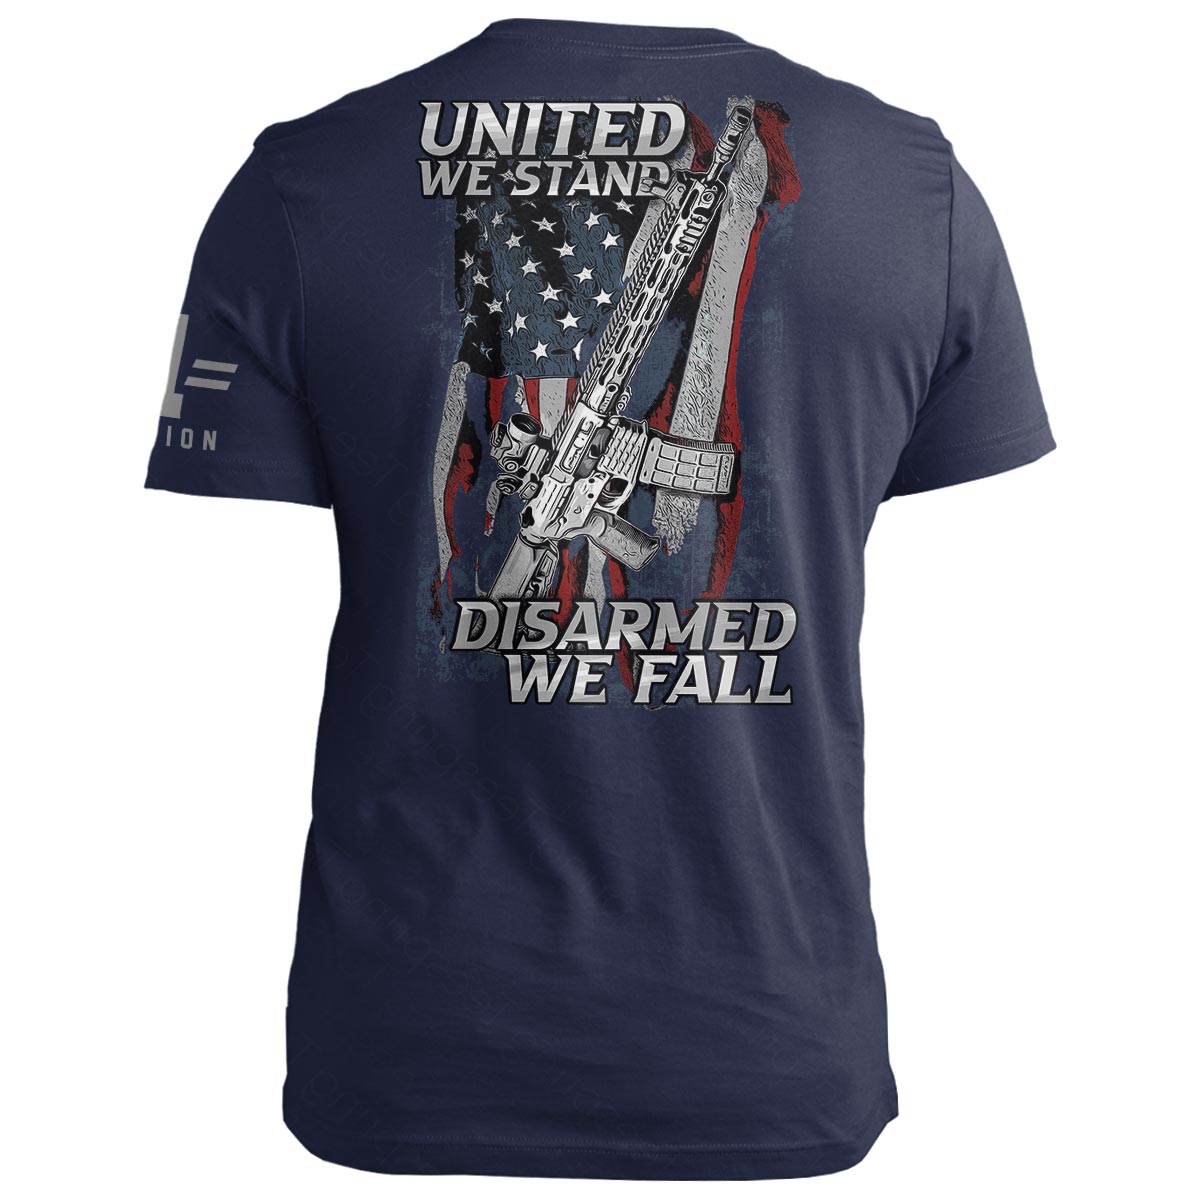 United We Stand. Disarmed We Fall